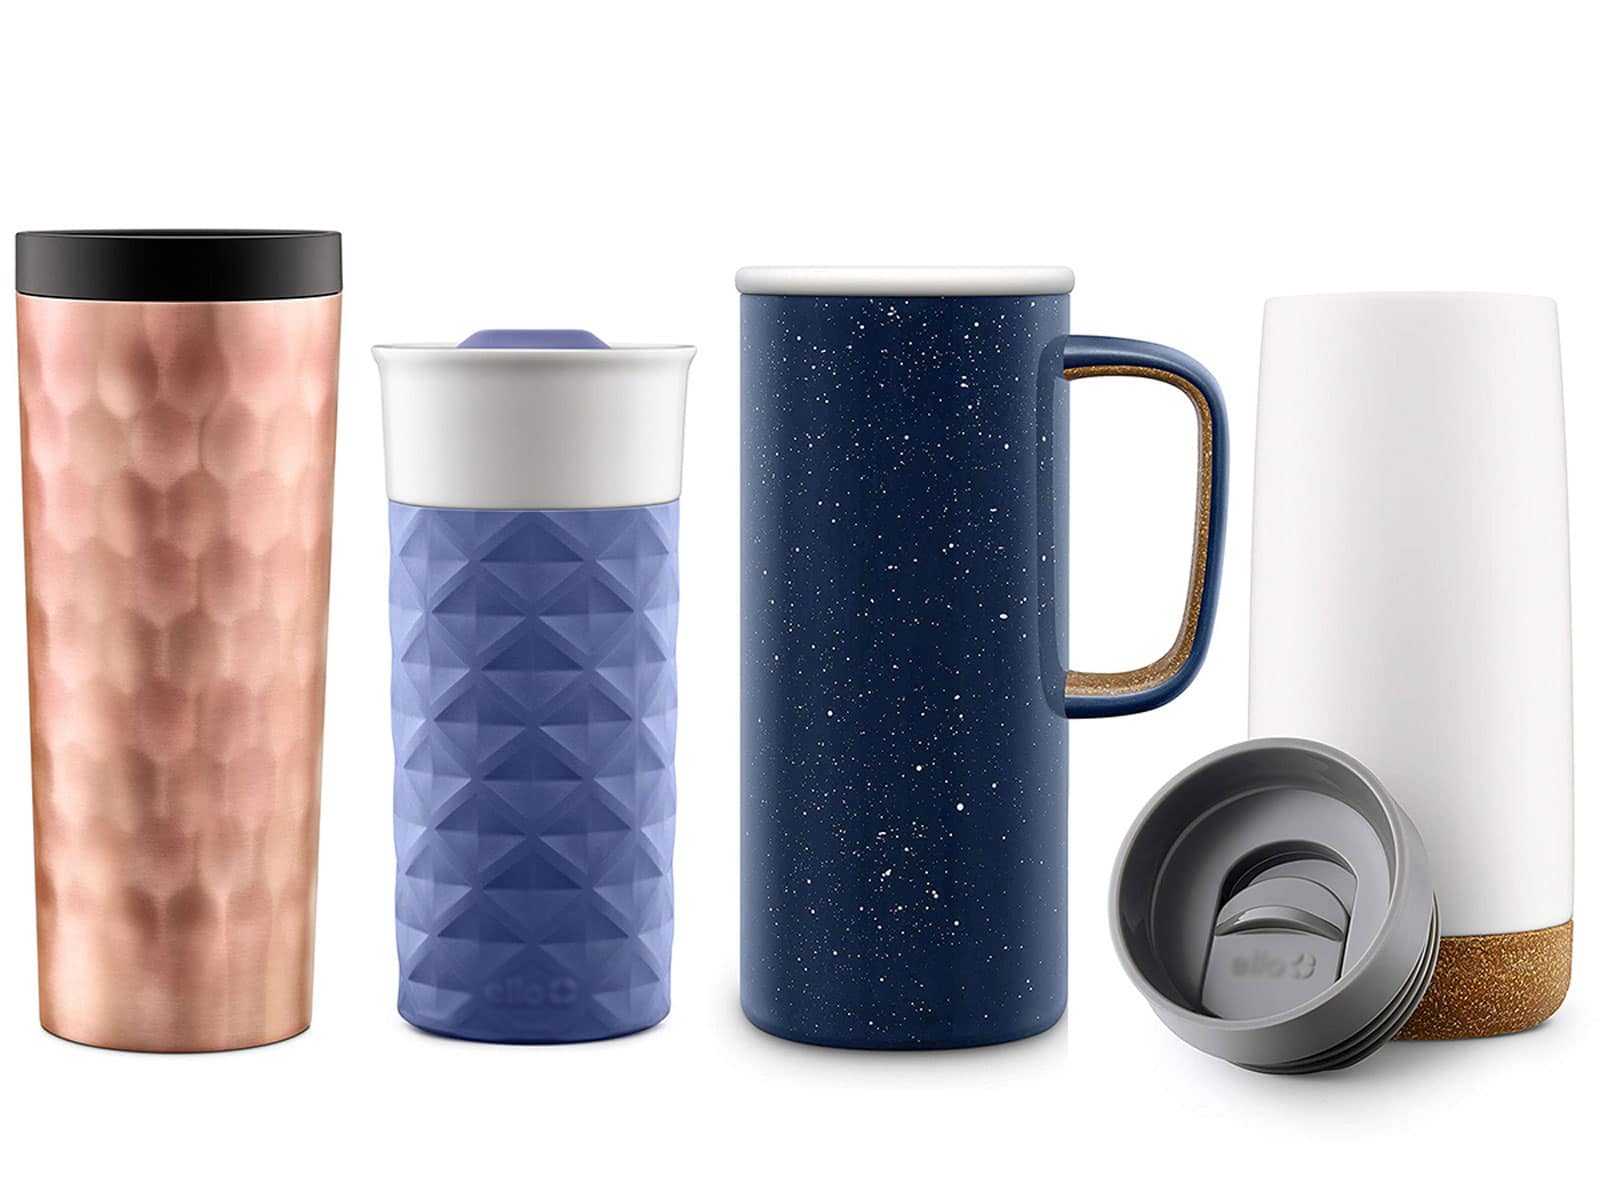 15 Types of Coffee Cups and Mugs - Choose the Best One for Every Occasion